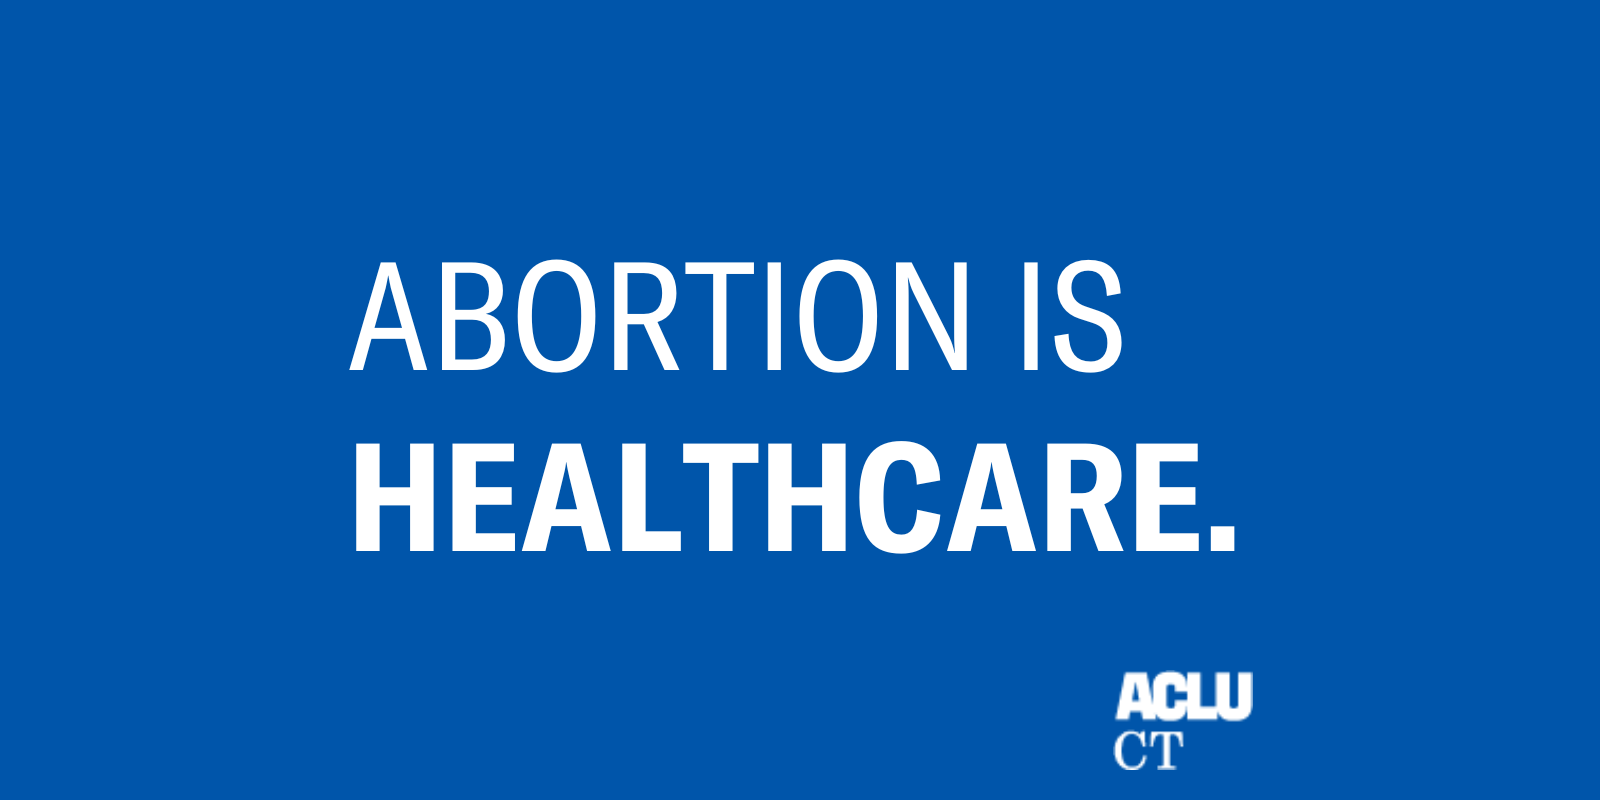 Abortion is Healthcare, written in white on the blue background